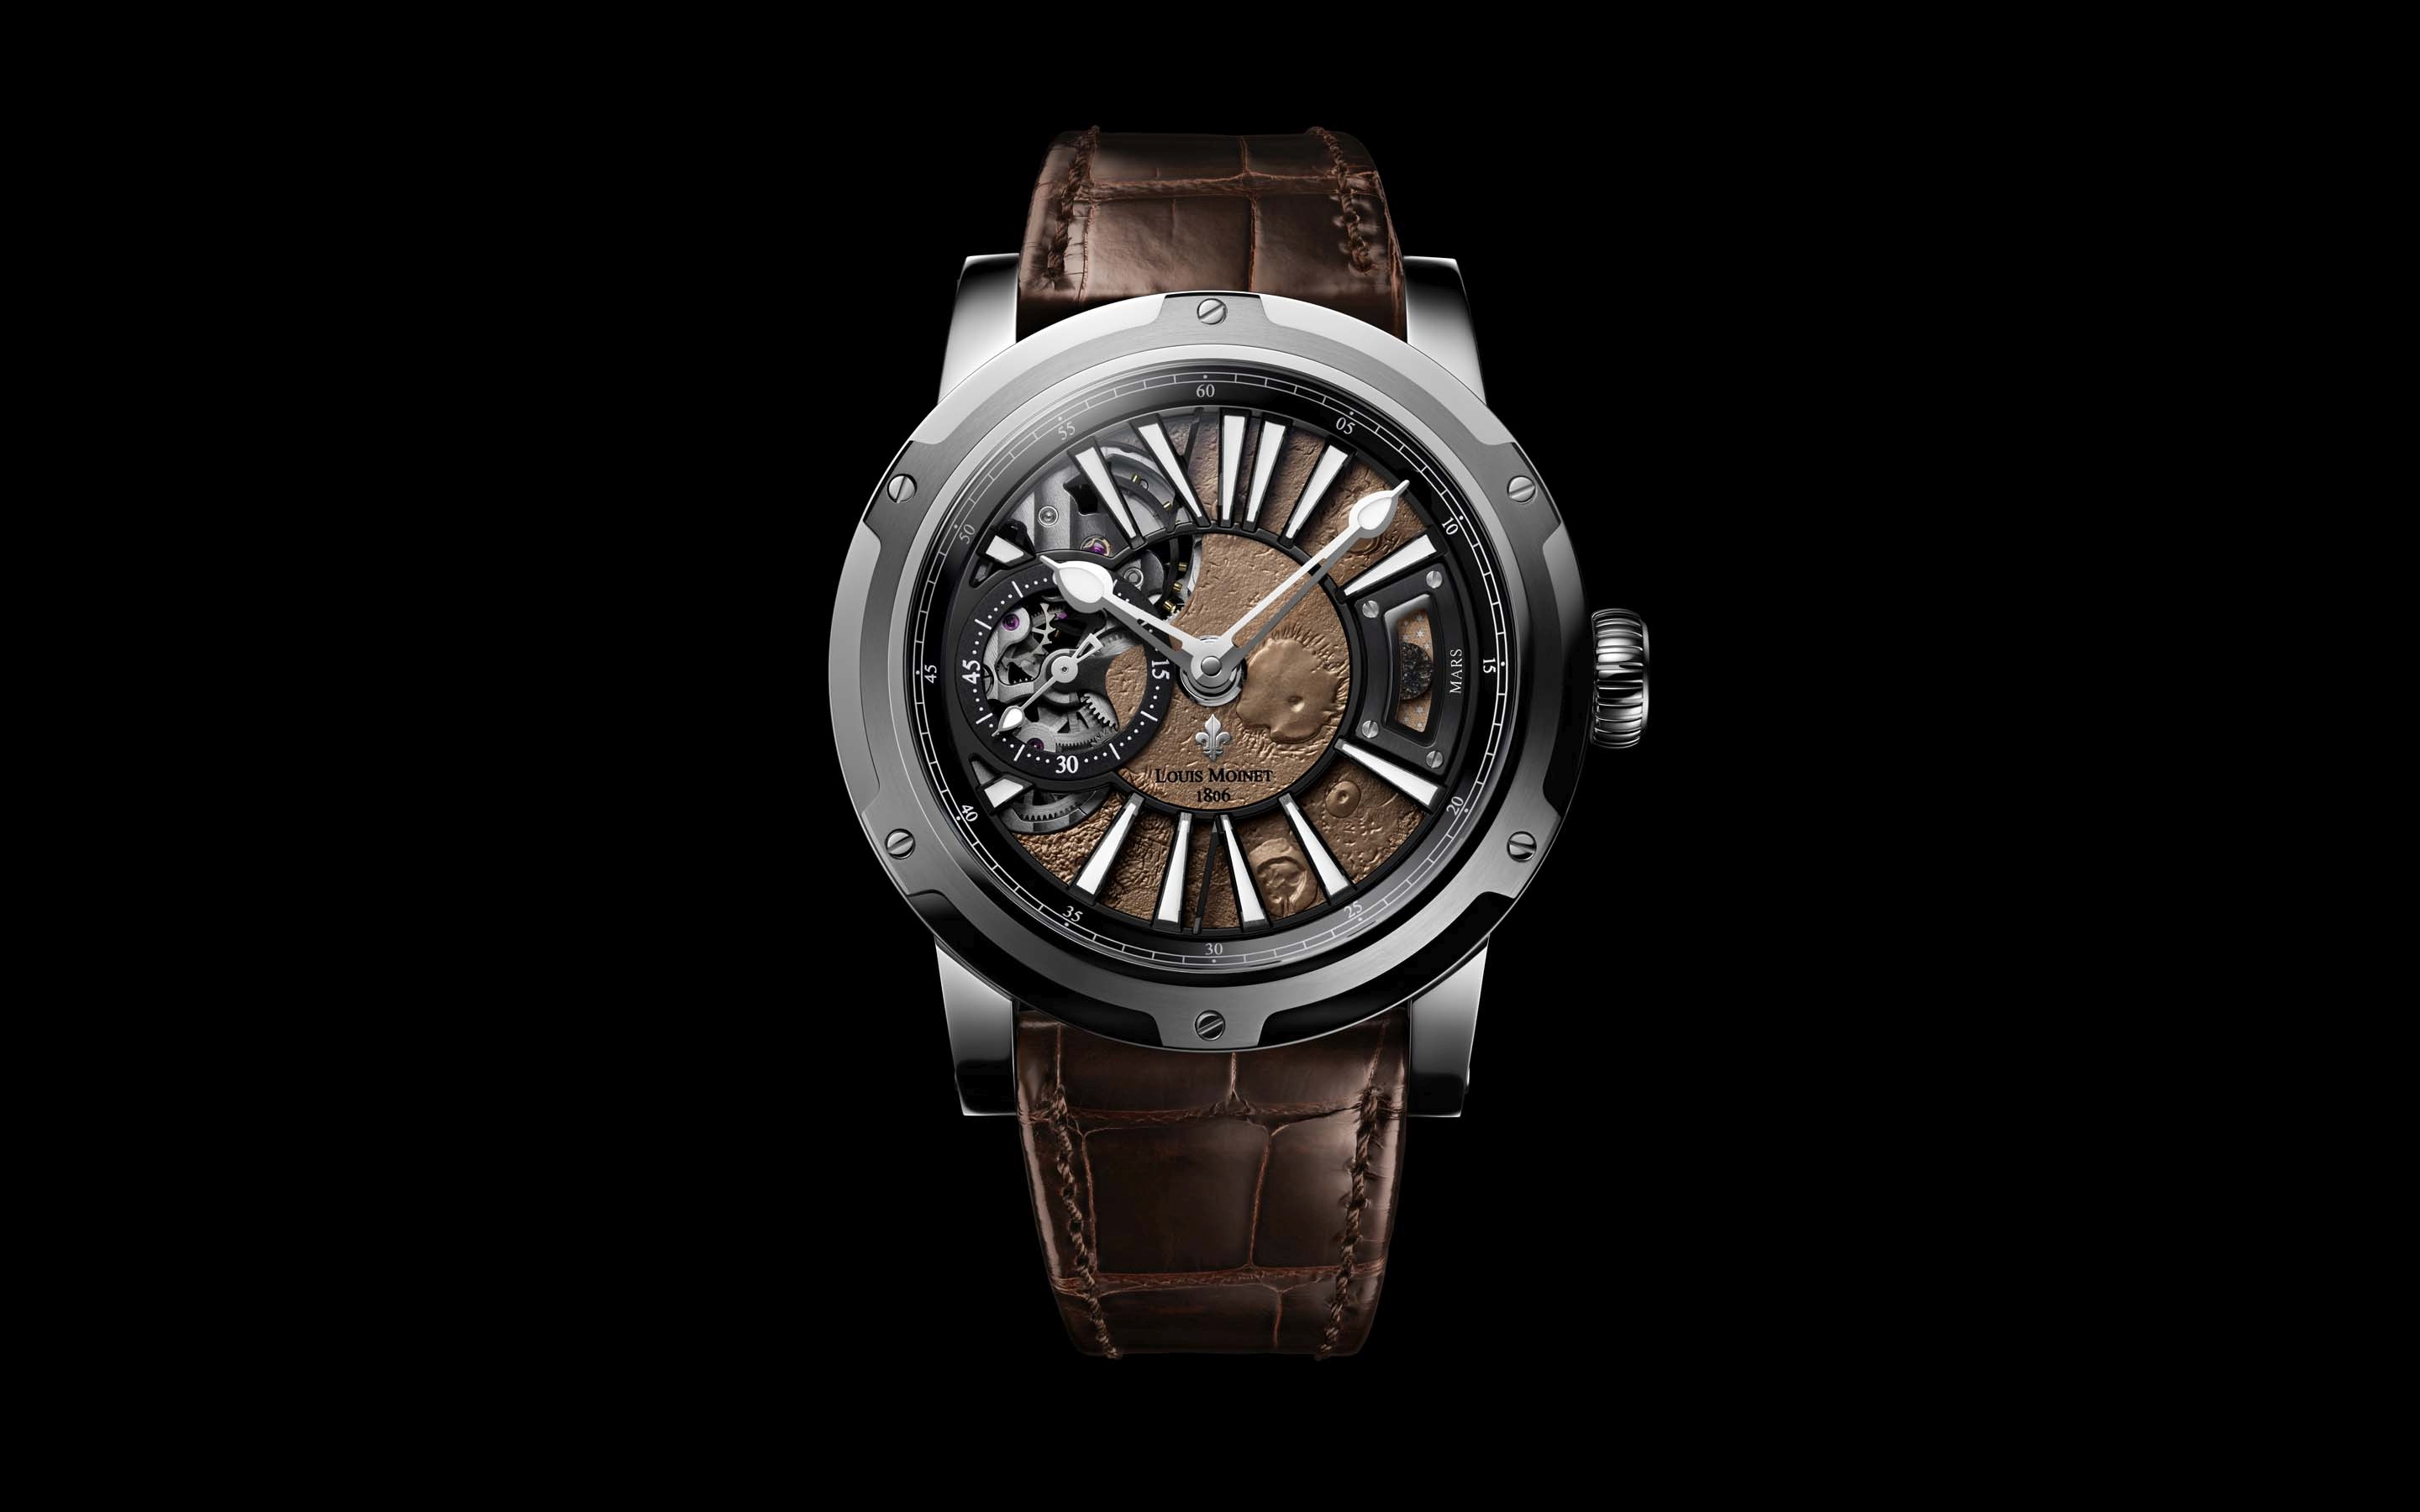 man made, watch, louis moinet High Definition image